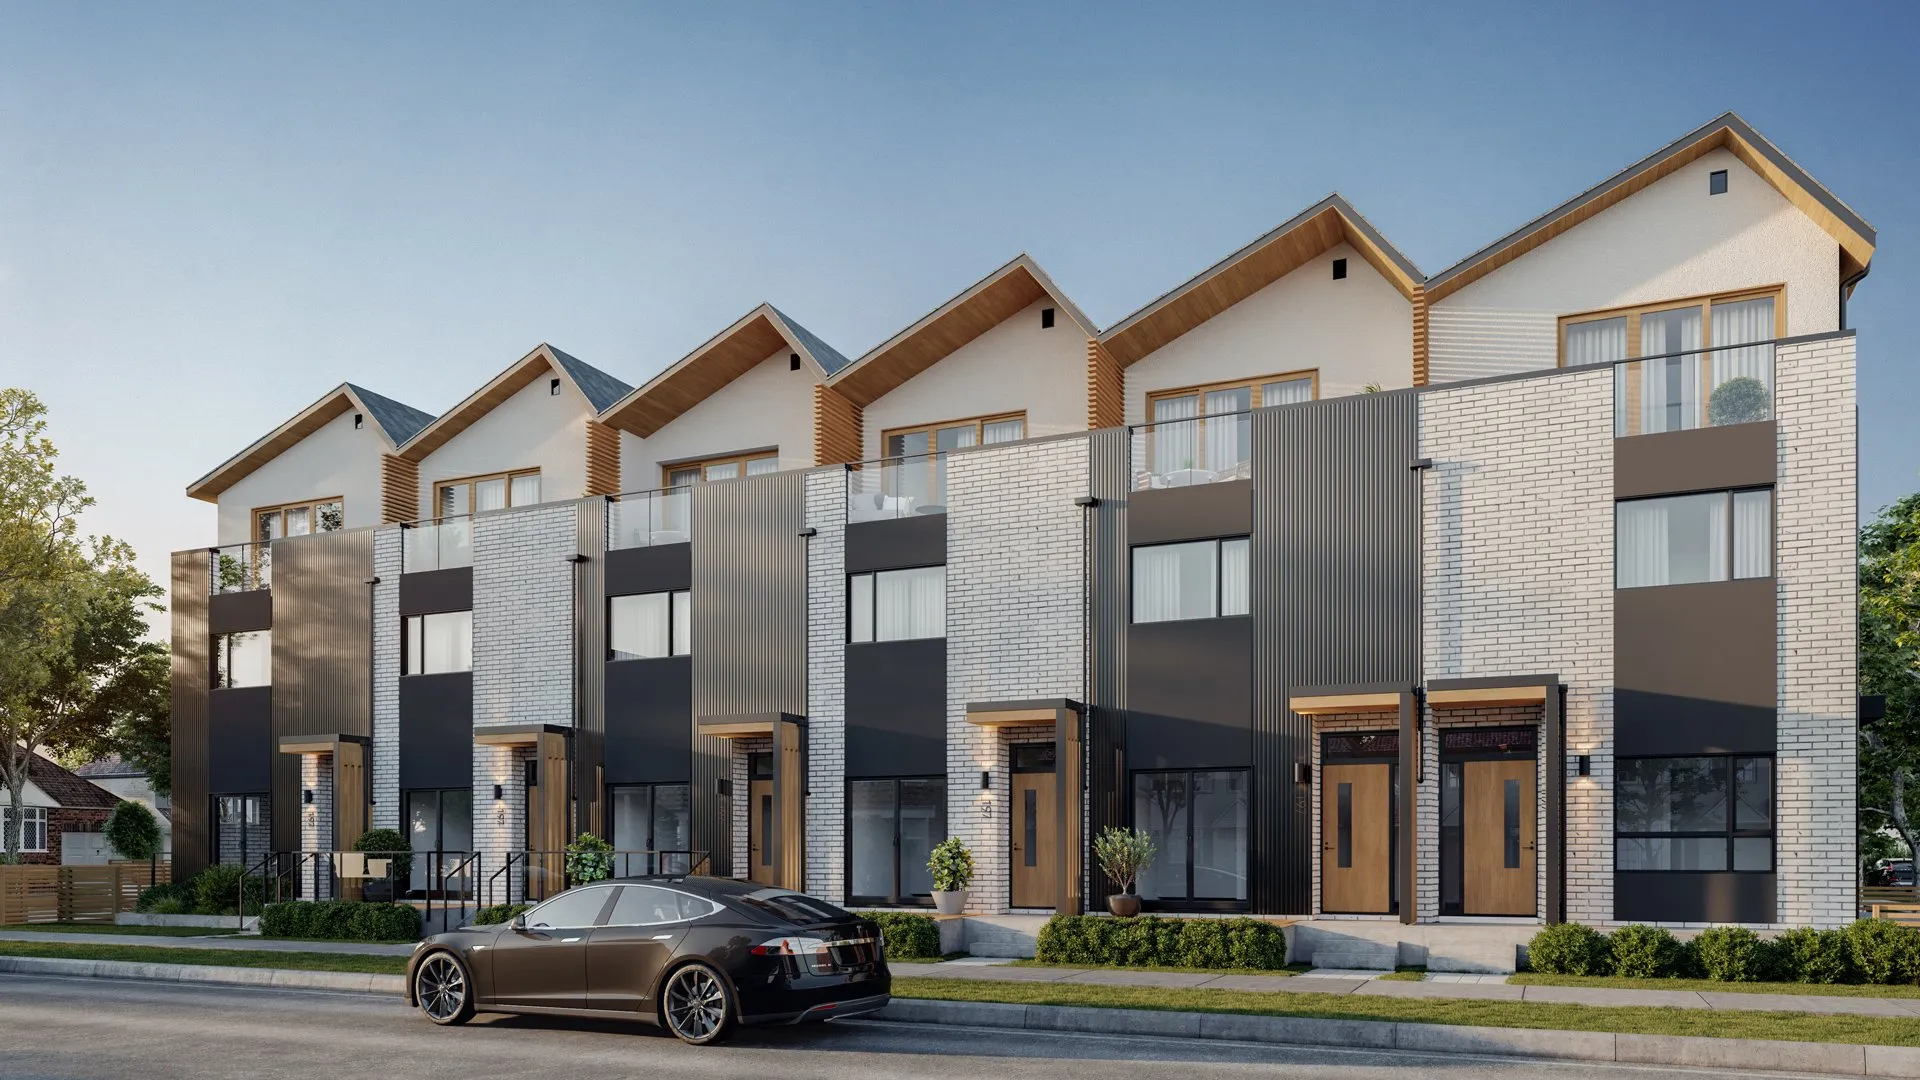 Beau Townhomes by Fastmark – Plans, Prices, Availability